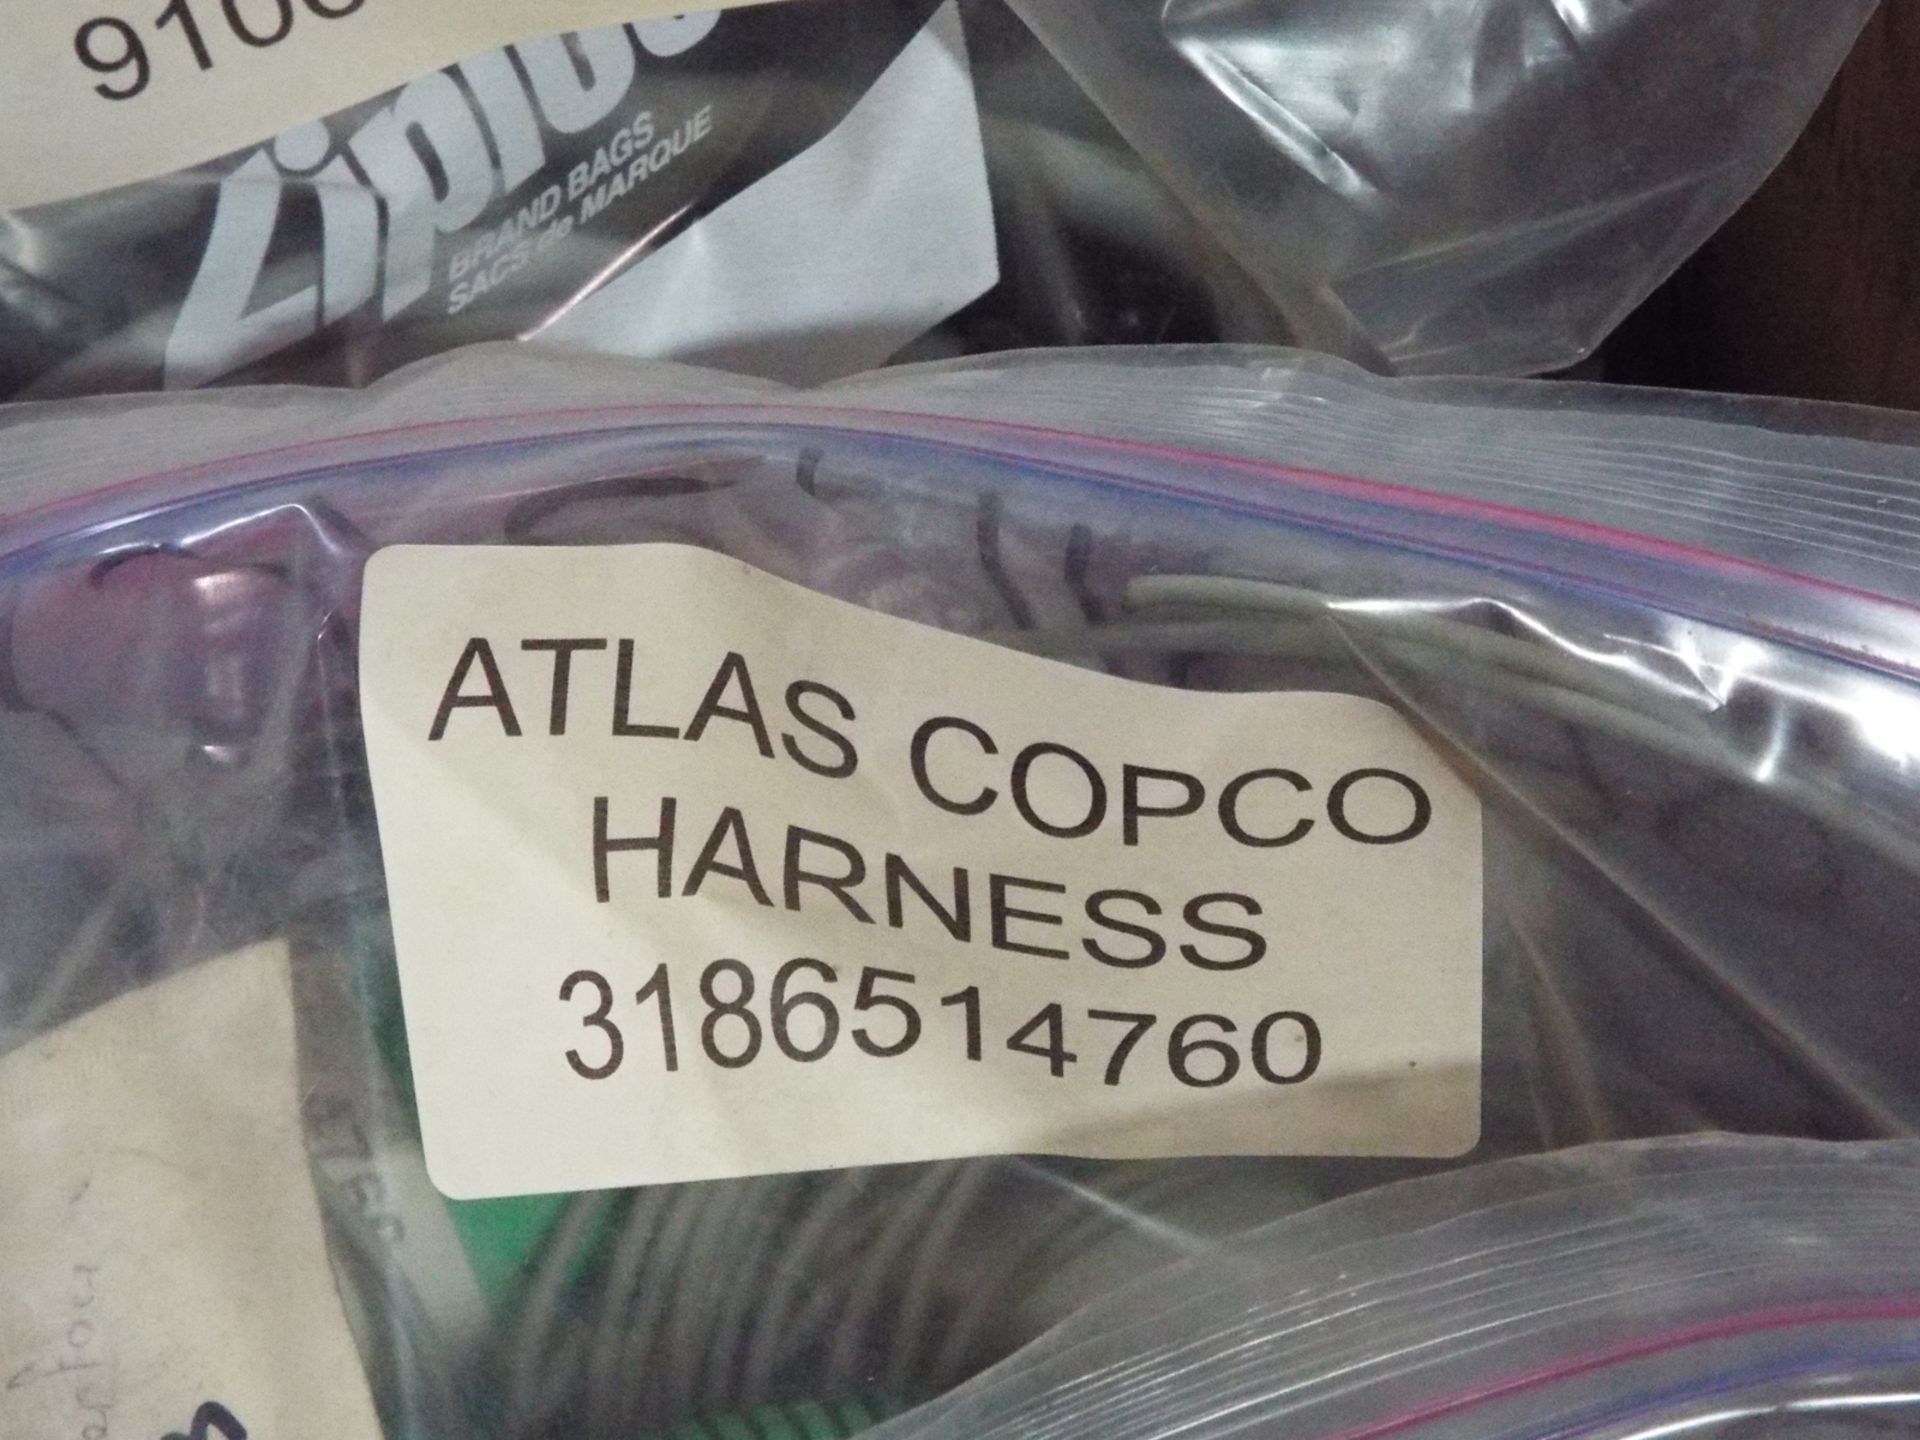 LOT/ ATLAS COPCO PARTS INCLUDING BUSHING STEEL, CONE, BAT CABLE, AND OTHER CABLES/HARNESSES - Image 15 of 16